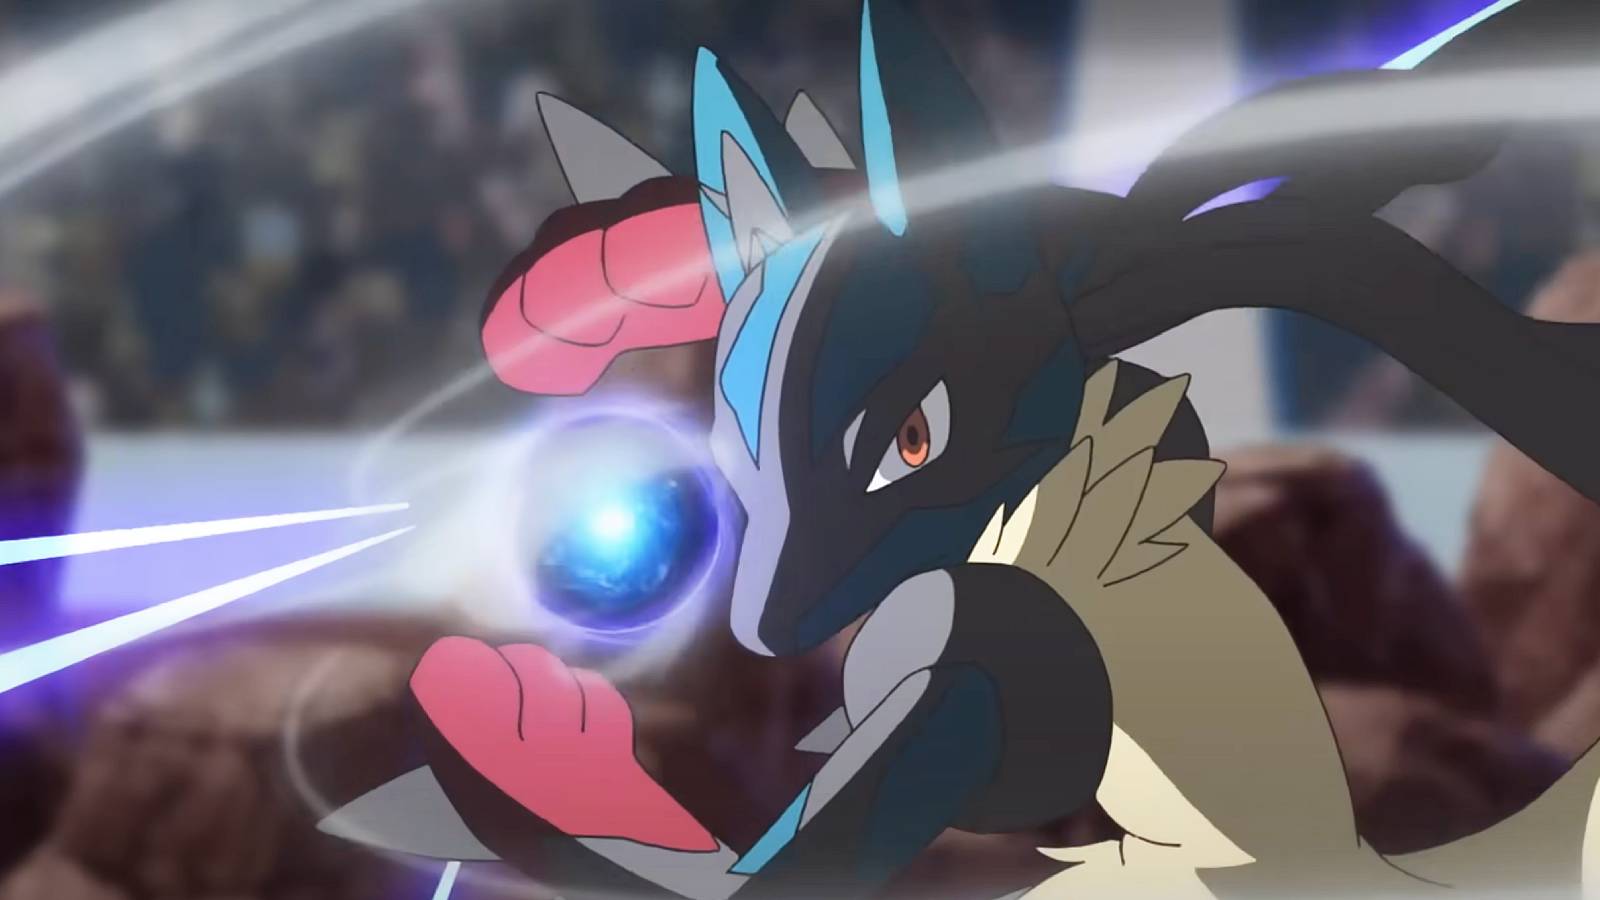 A screenshot from the Pokemon anime shows Mega Lucario readying the attack Aura Sphere